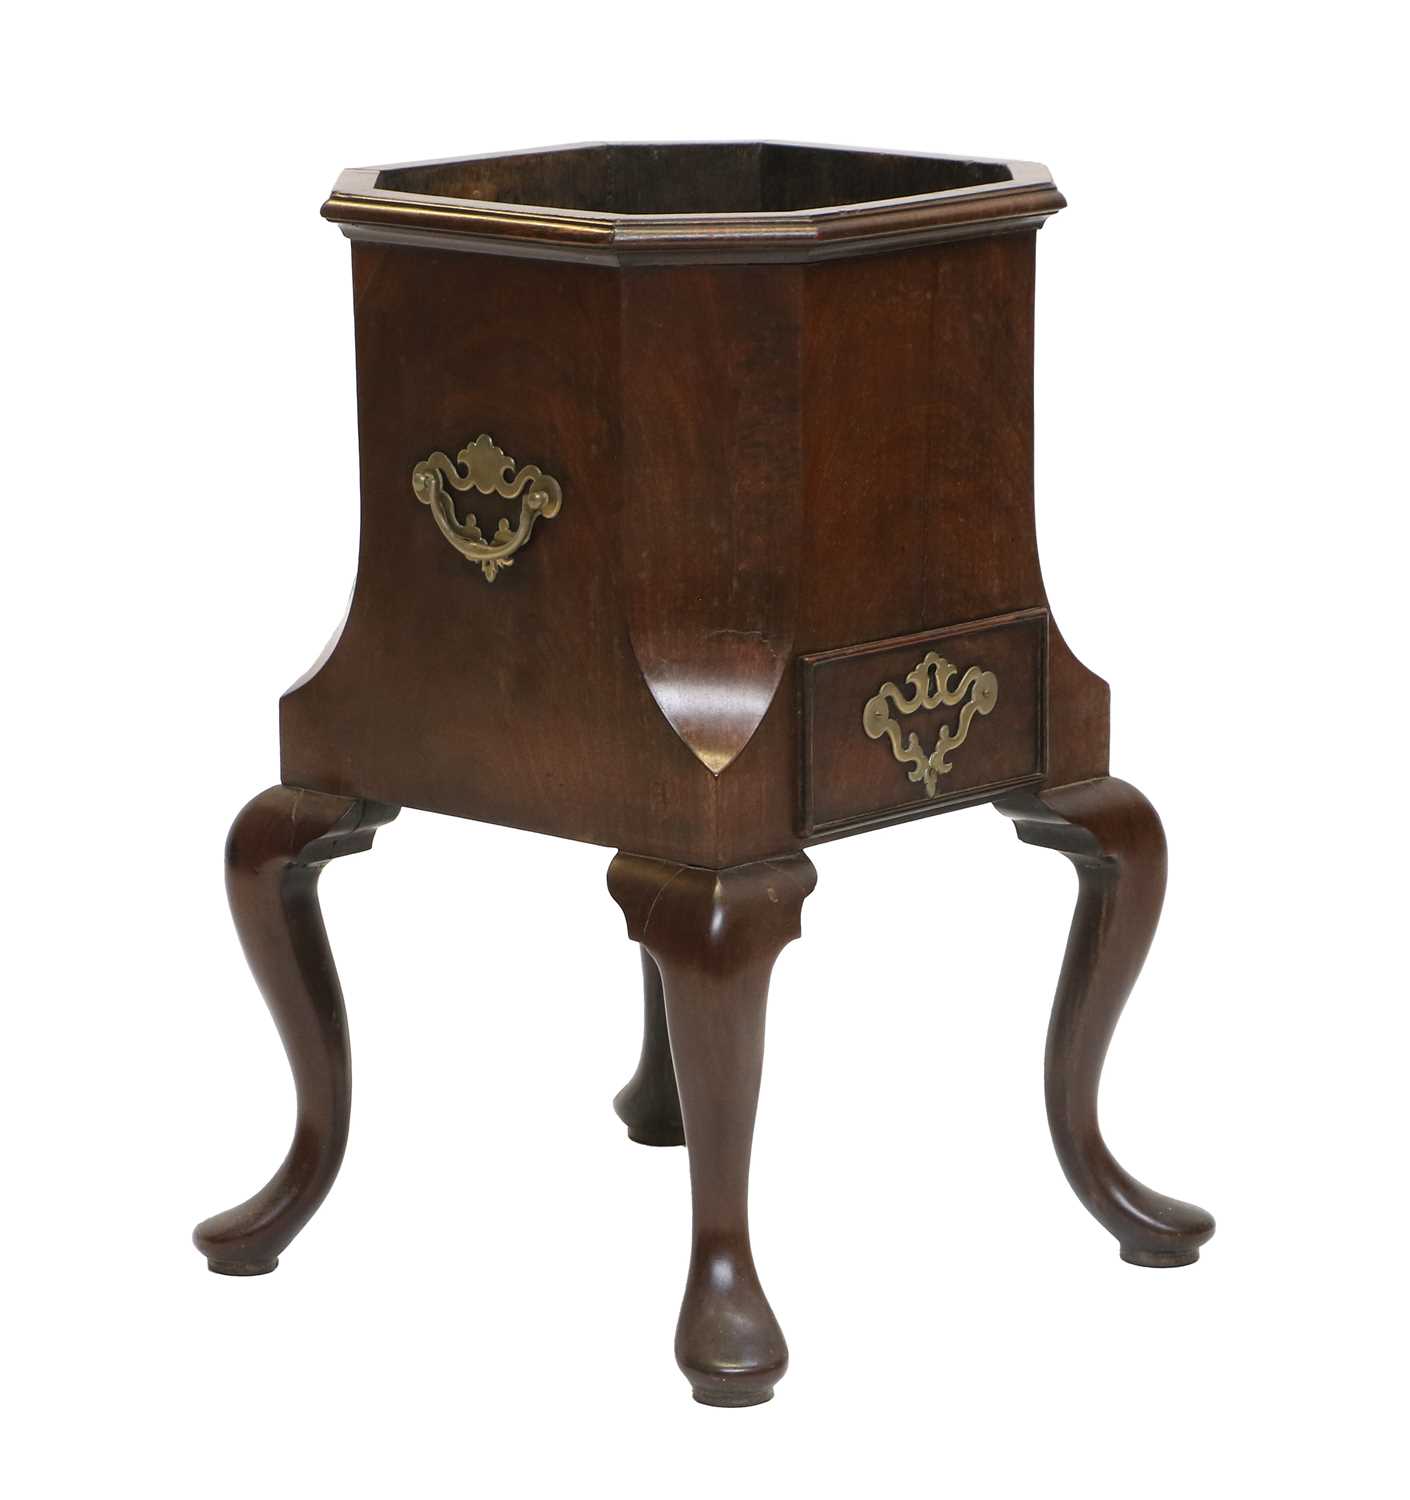 A George III Mahogany Planter, late 18th century, of octagonal-shaped form with brass carrying - Image 3 of 8